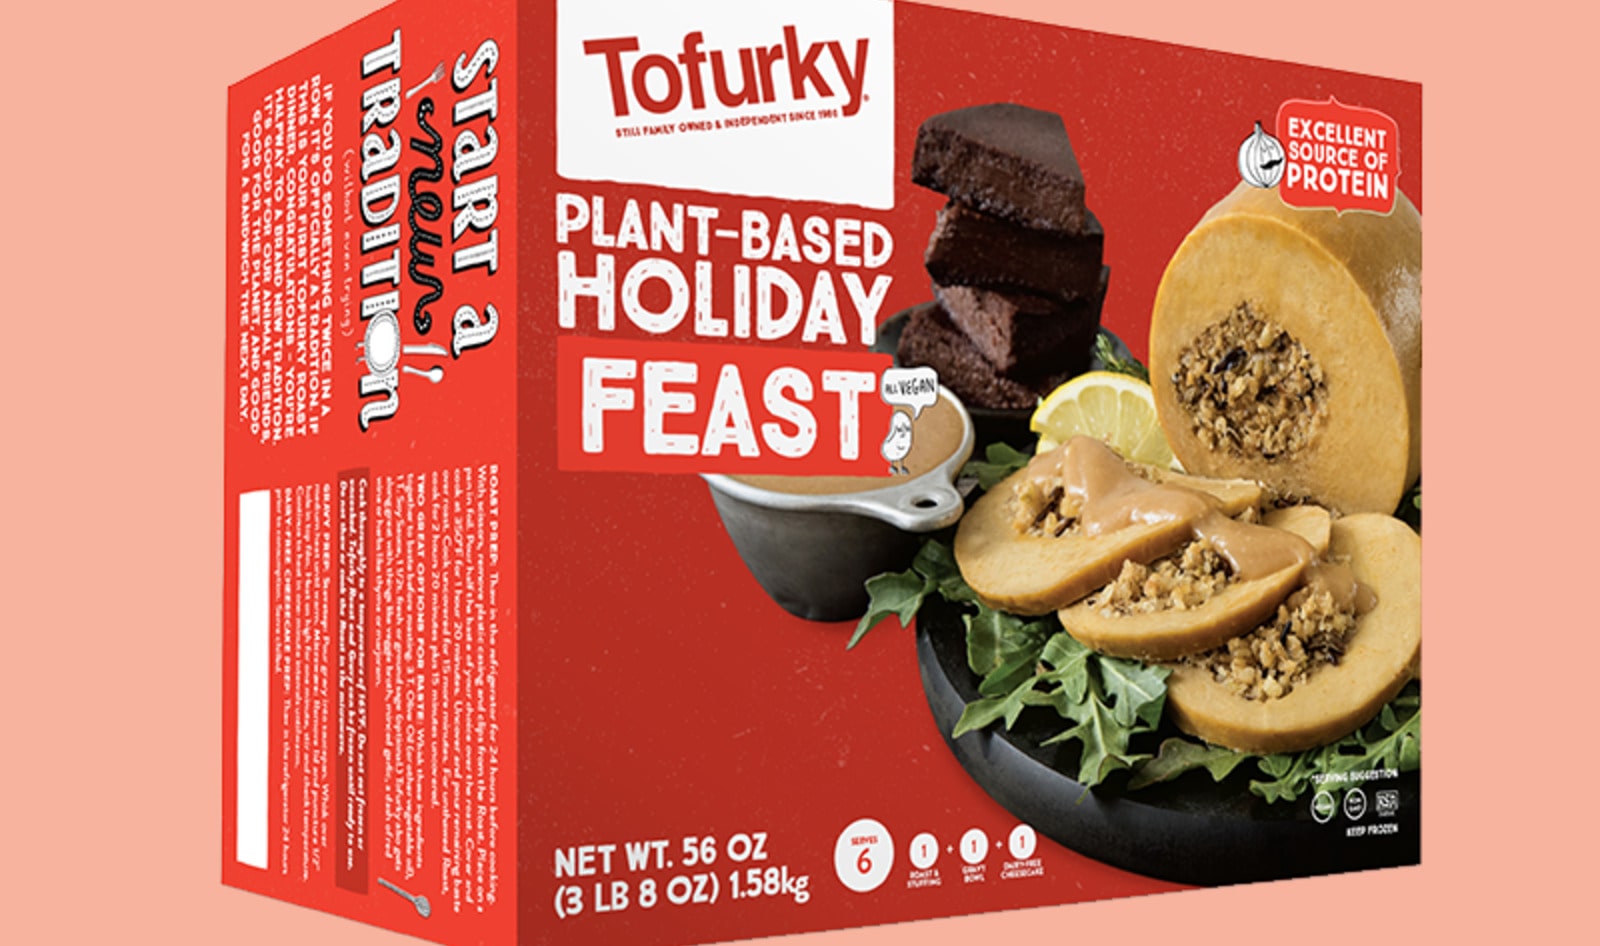 Los Angeles Dodgers Gave Away 100 Tofurky Roasts for Thanksgiving